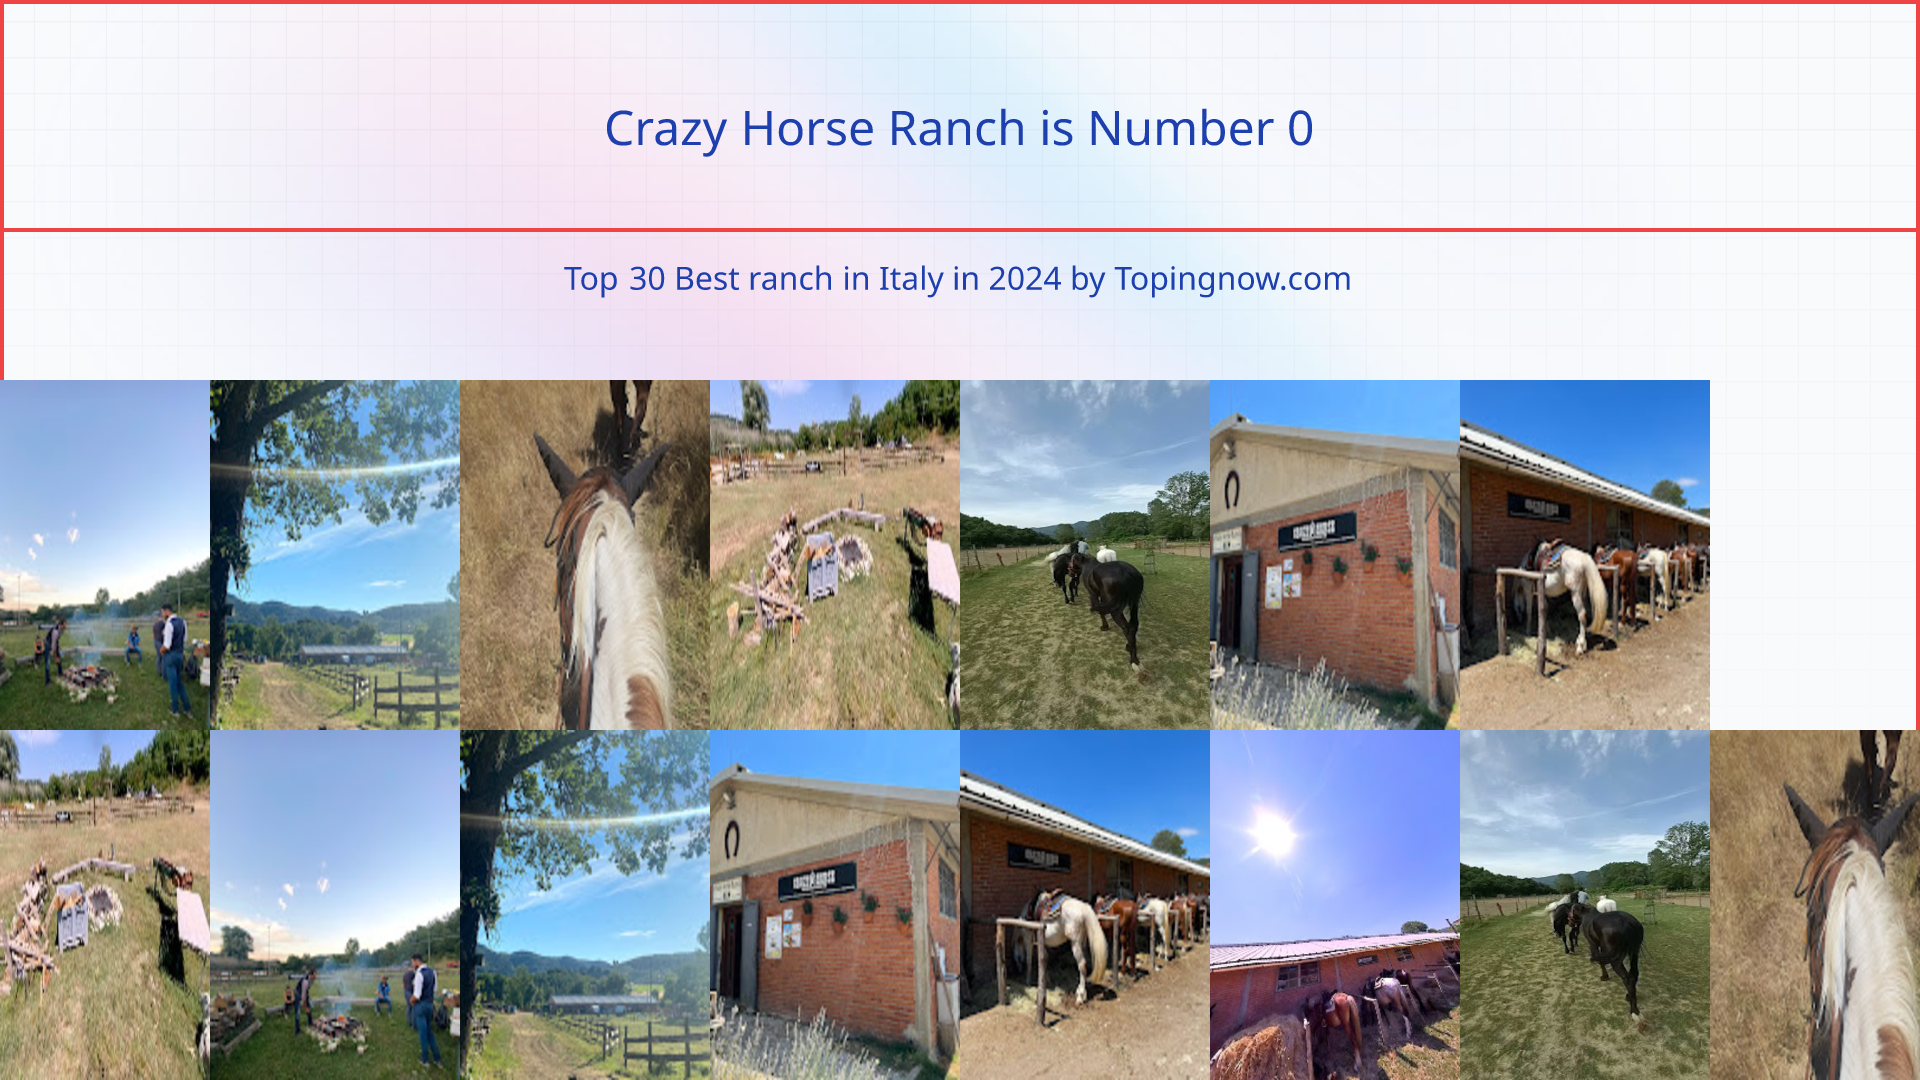 Crazy Horse Ranch: Top 30 Best ranch in Italy in 2024